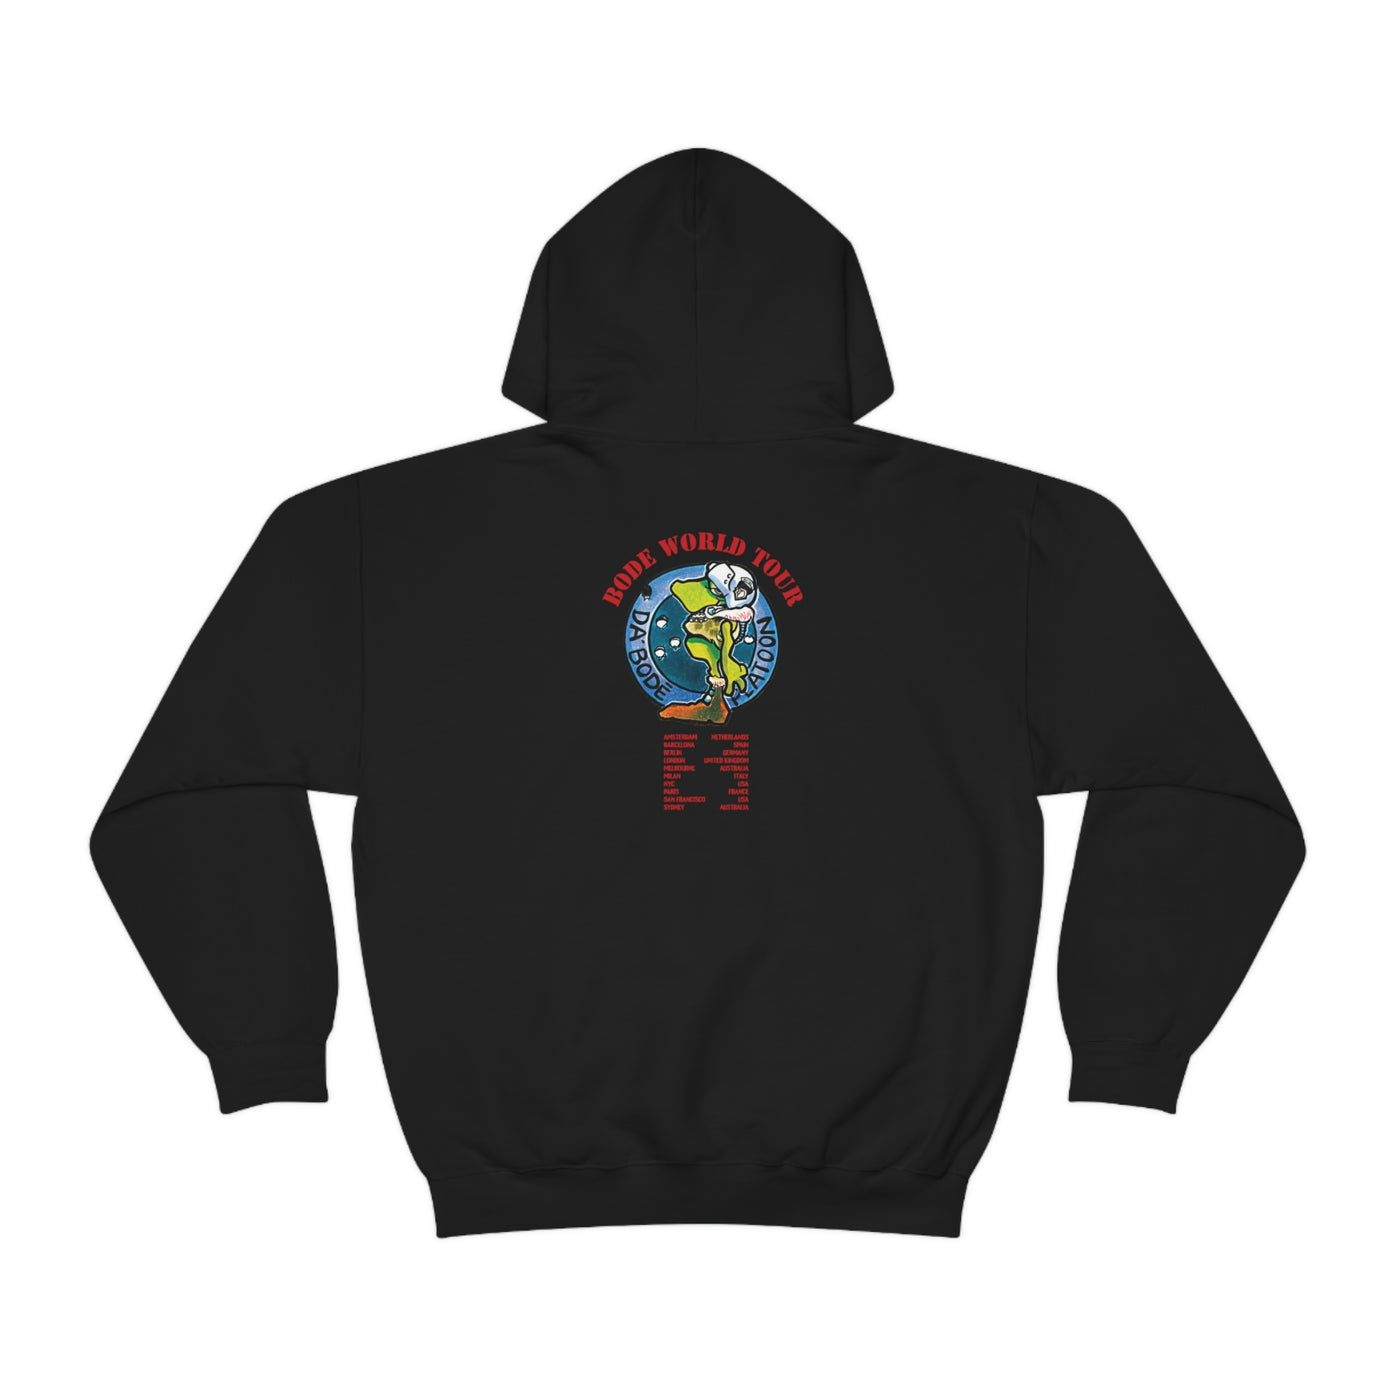 Bode World Tour "Tanking Around" Double sided Limited Edition Hoodie Black